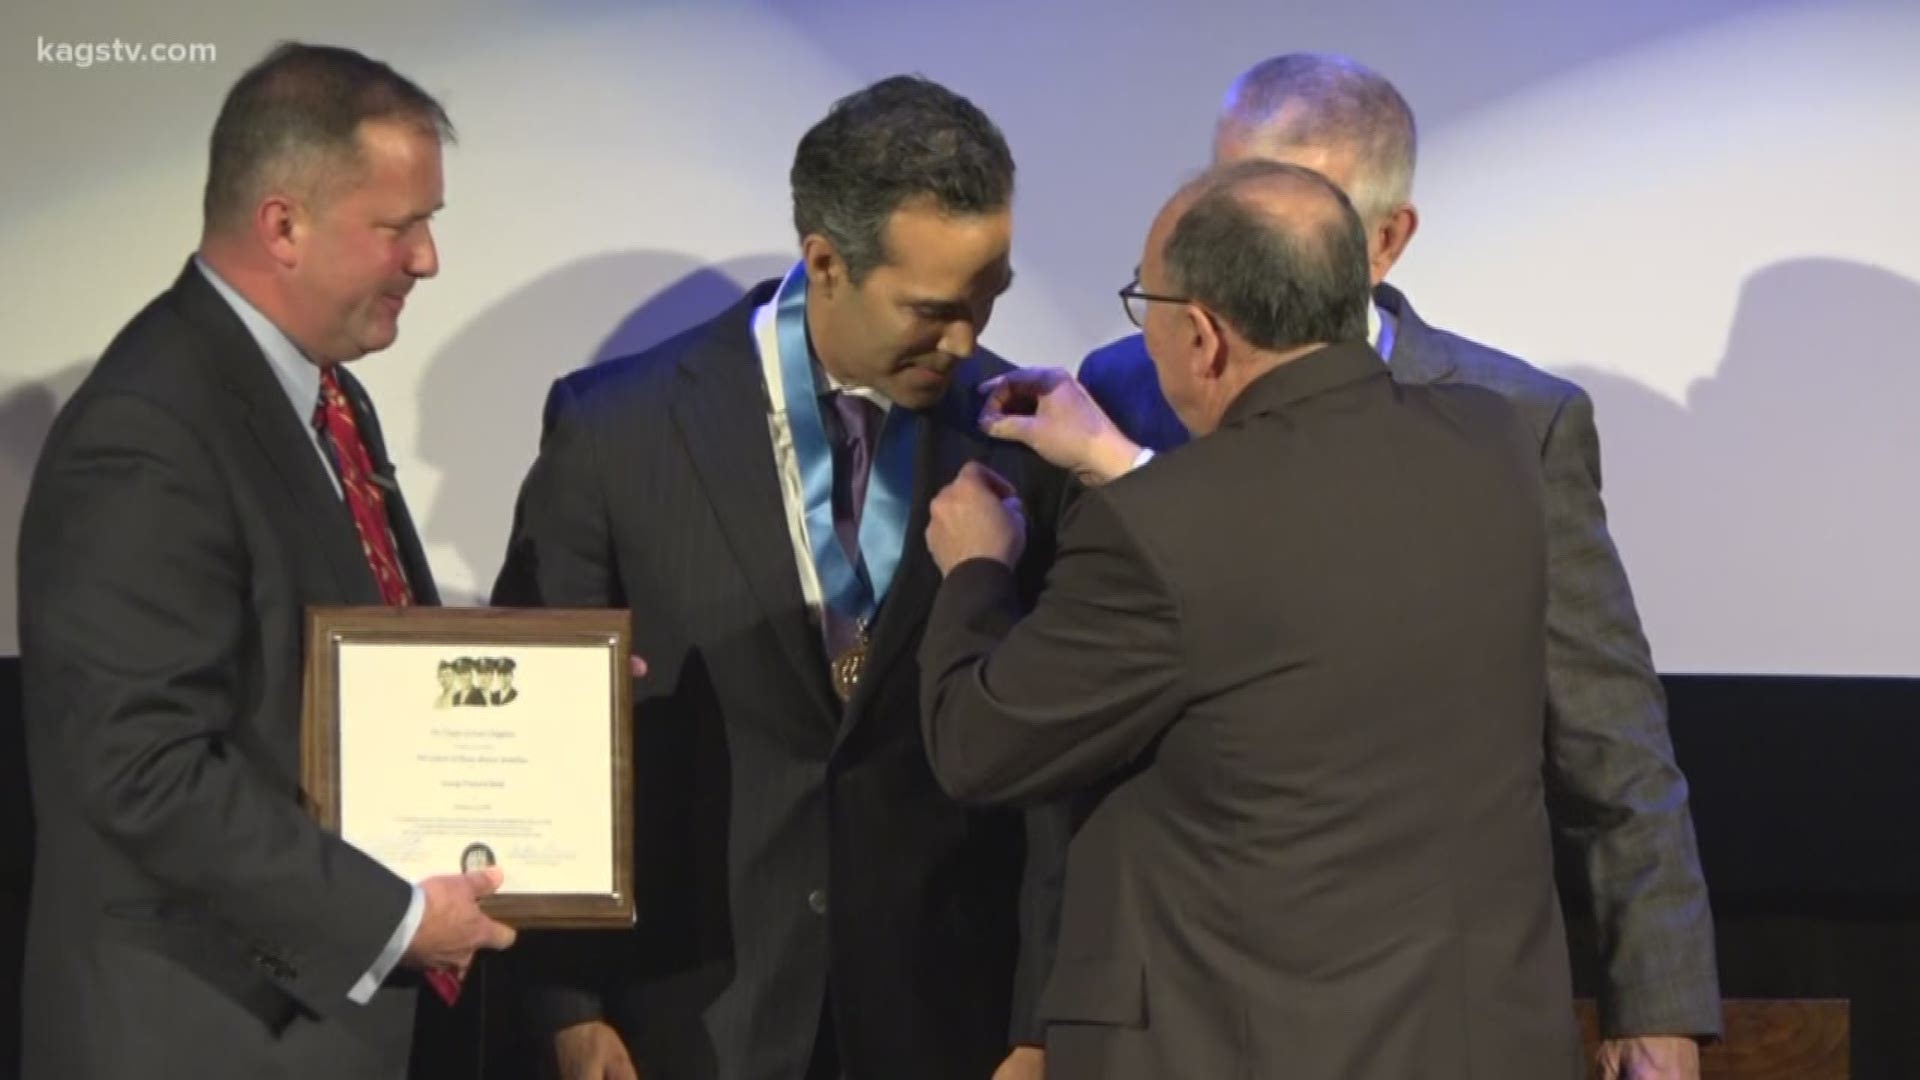 The Santa Fe ISD officers are receiving the Charles W. David, Jr. Lifesaving Medallion for their response to the mass shooting at the school in 2018.